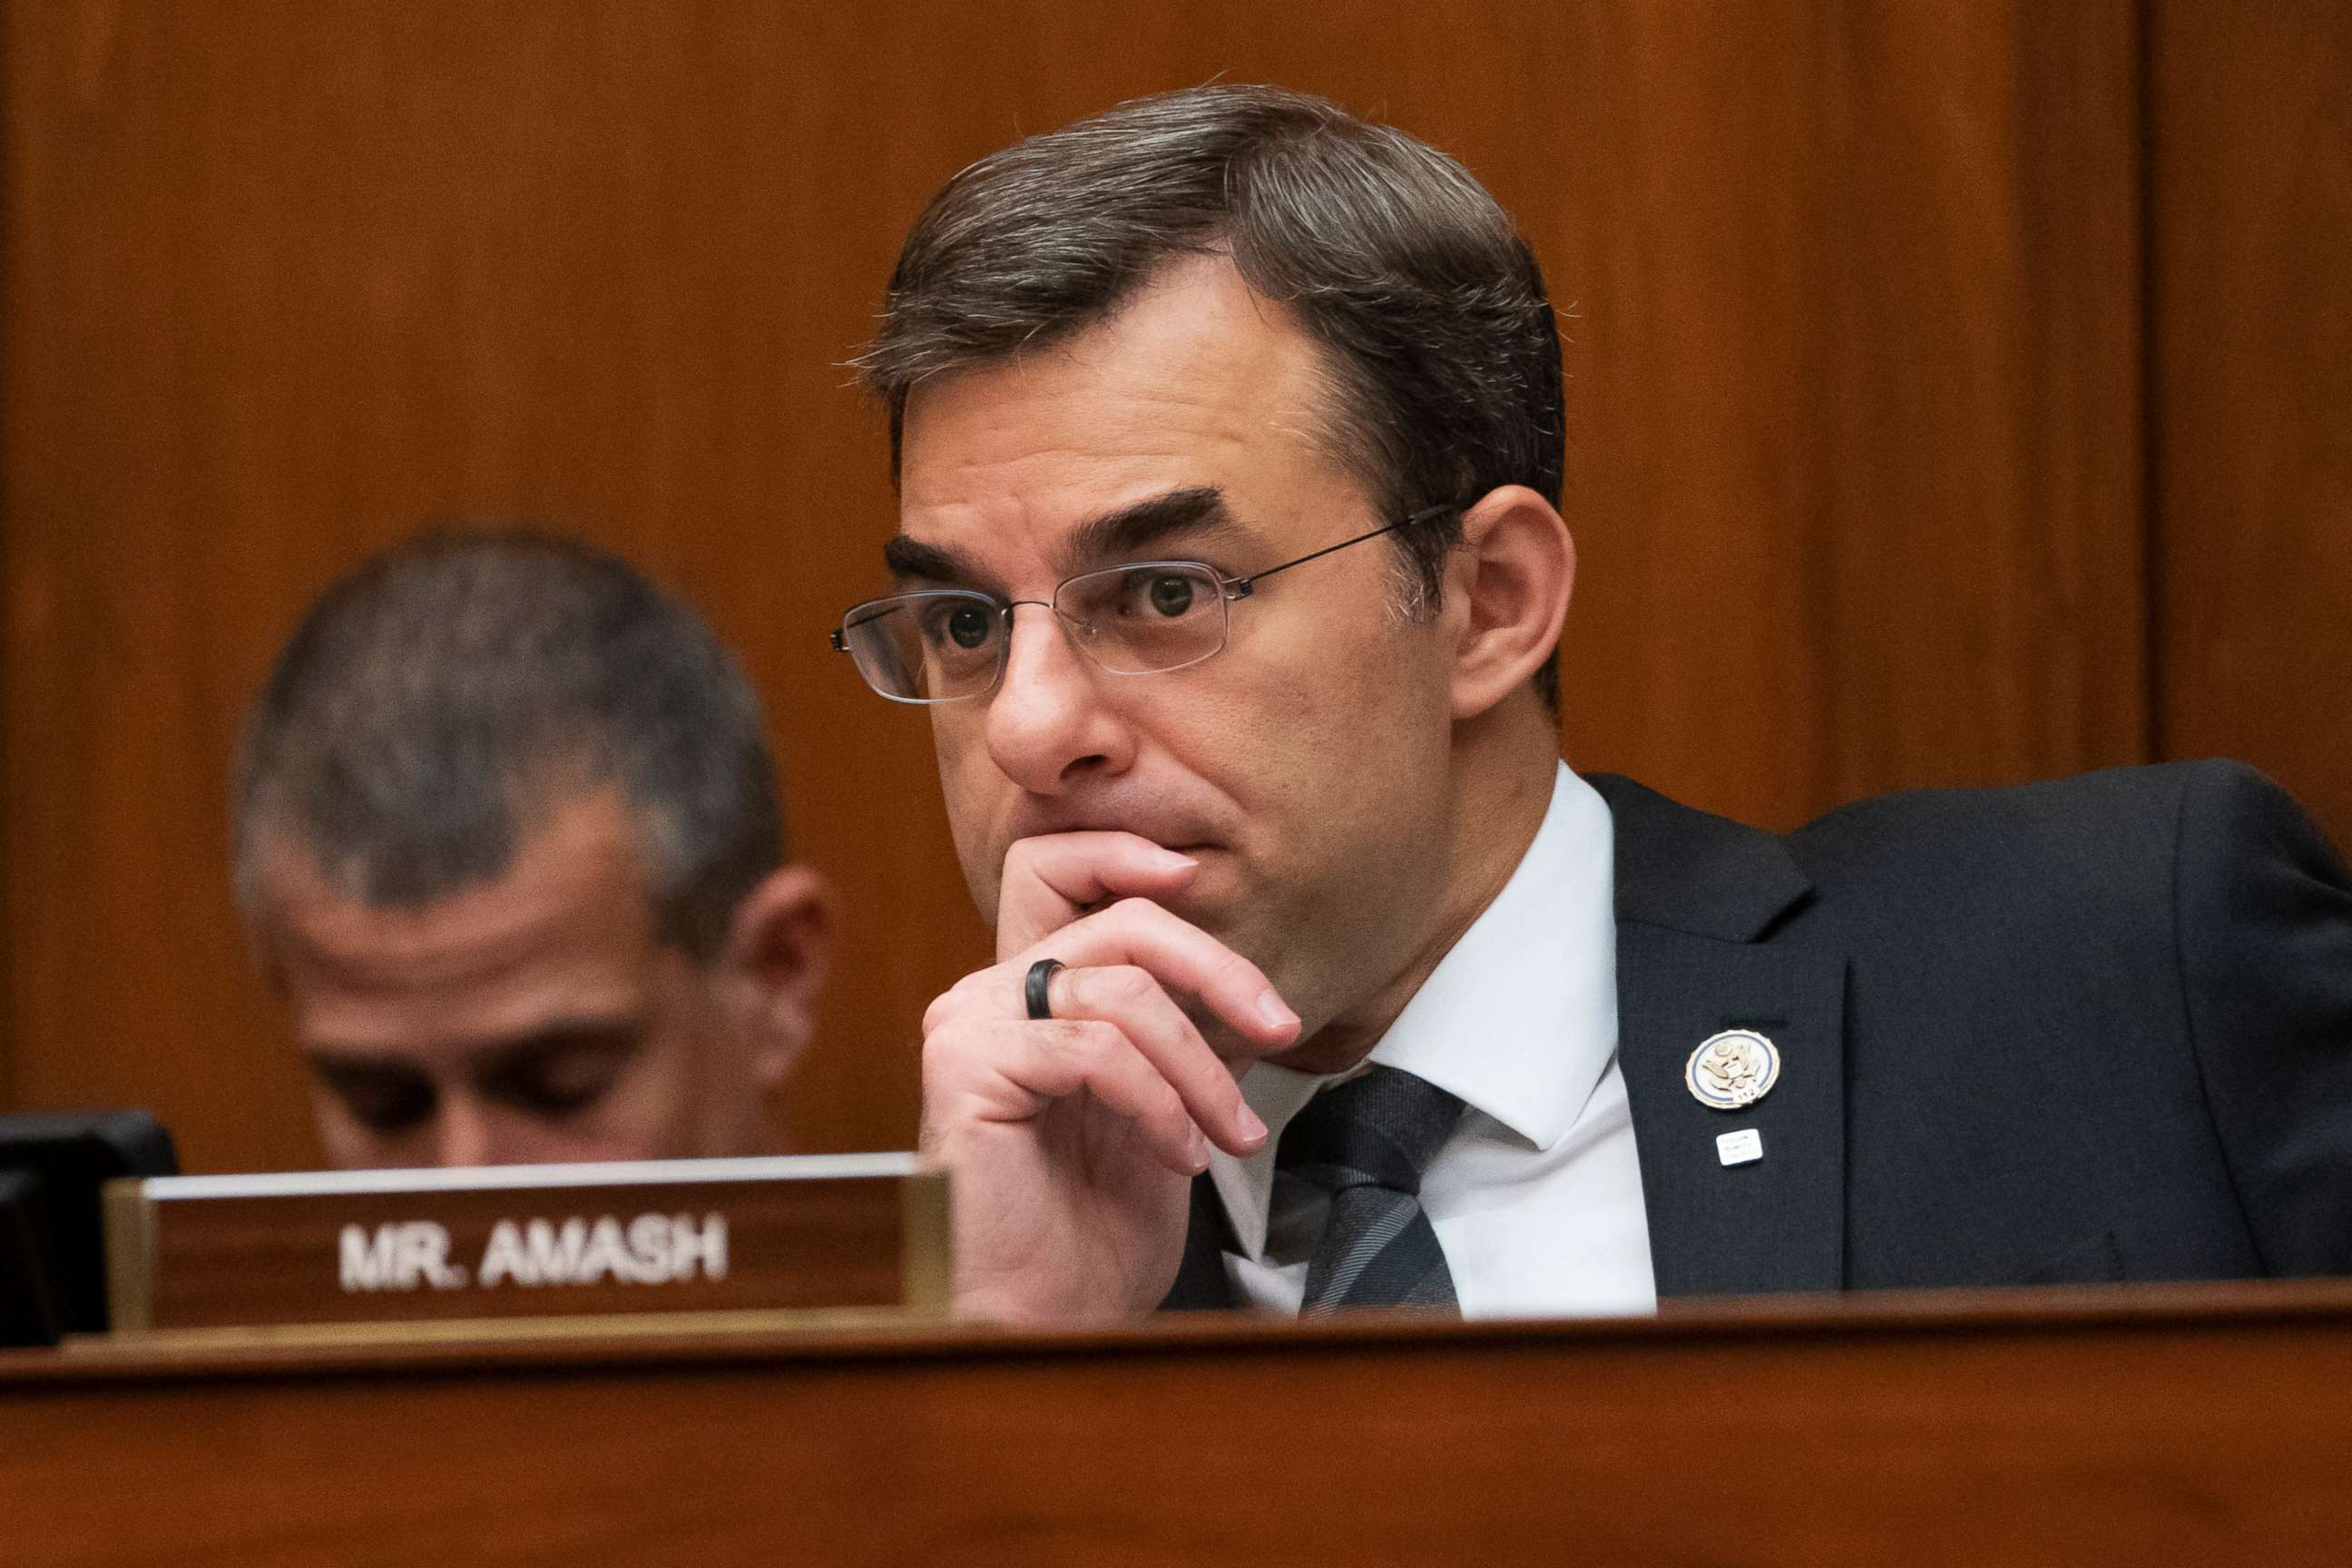 PHOTO: In this June 12, 2019, file photo, Rep. Justin Amash, R-Mich., listens to debate on Capitol Hill in Washington. Amash, a Trump critic, said Saturday, May 16, 2020, that he has decided not to seek the Libertarian nomination to run for president.